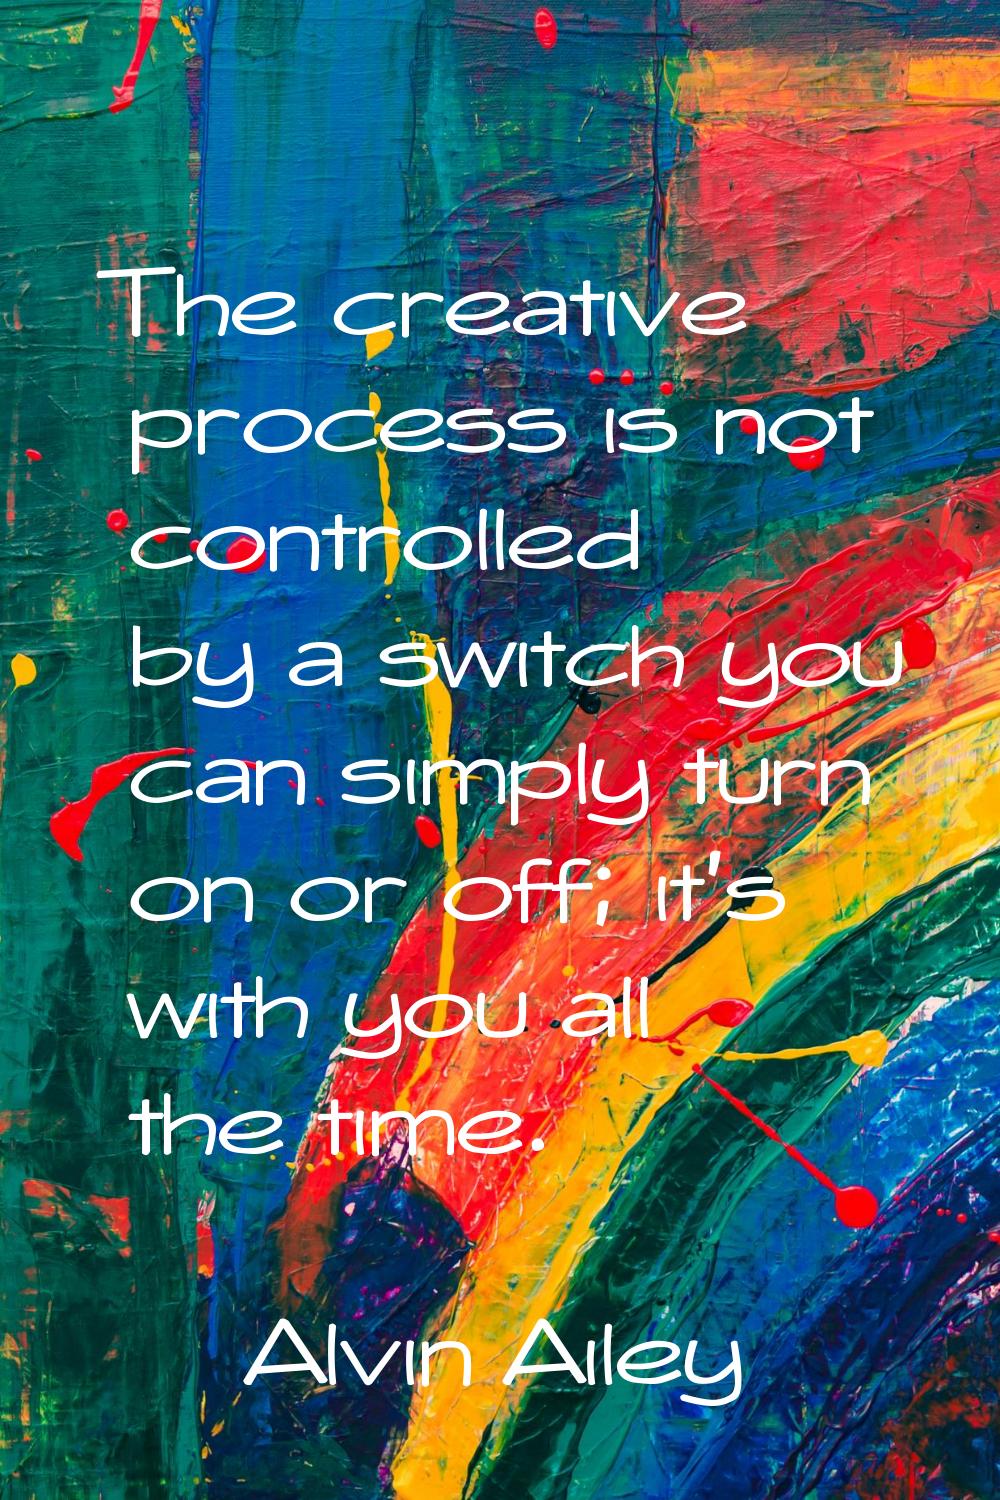 The creative process is not controlled by a switch you can simply turn on or off; it's with you all